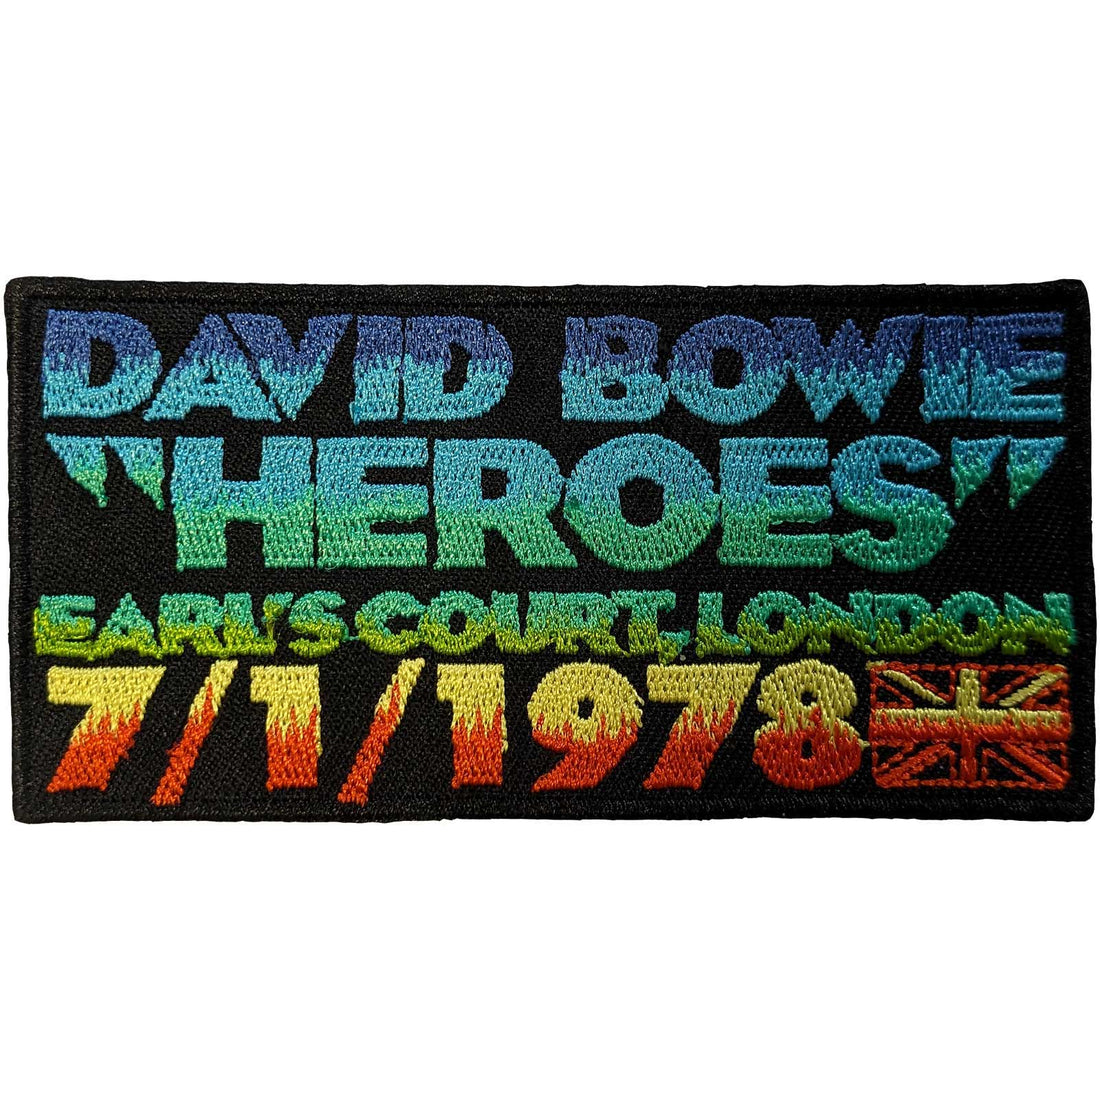 David Bowie Standard Woven Patch: Heroes Earls Court